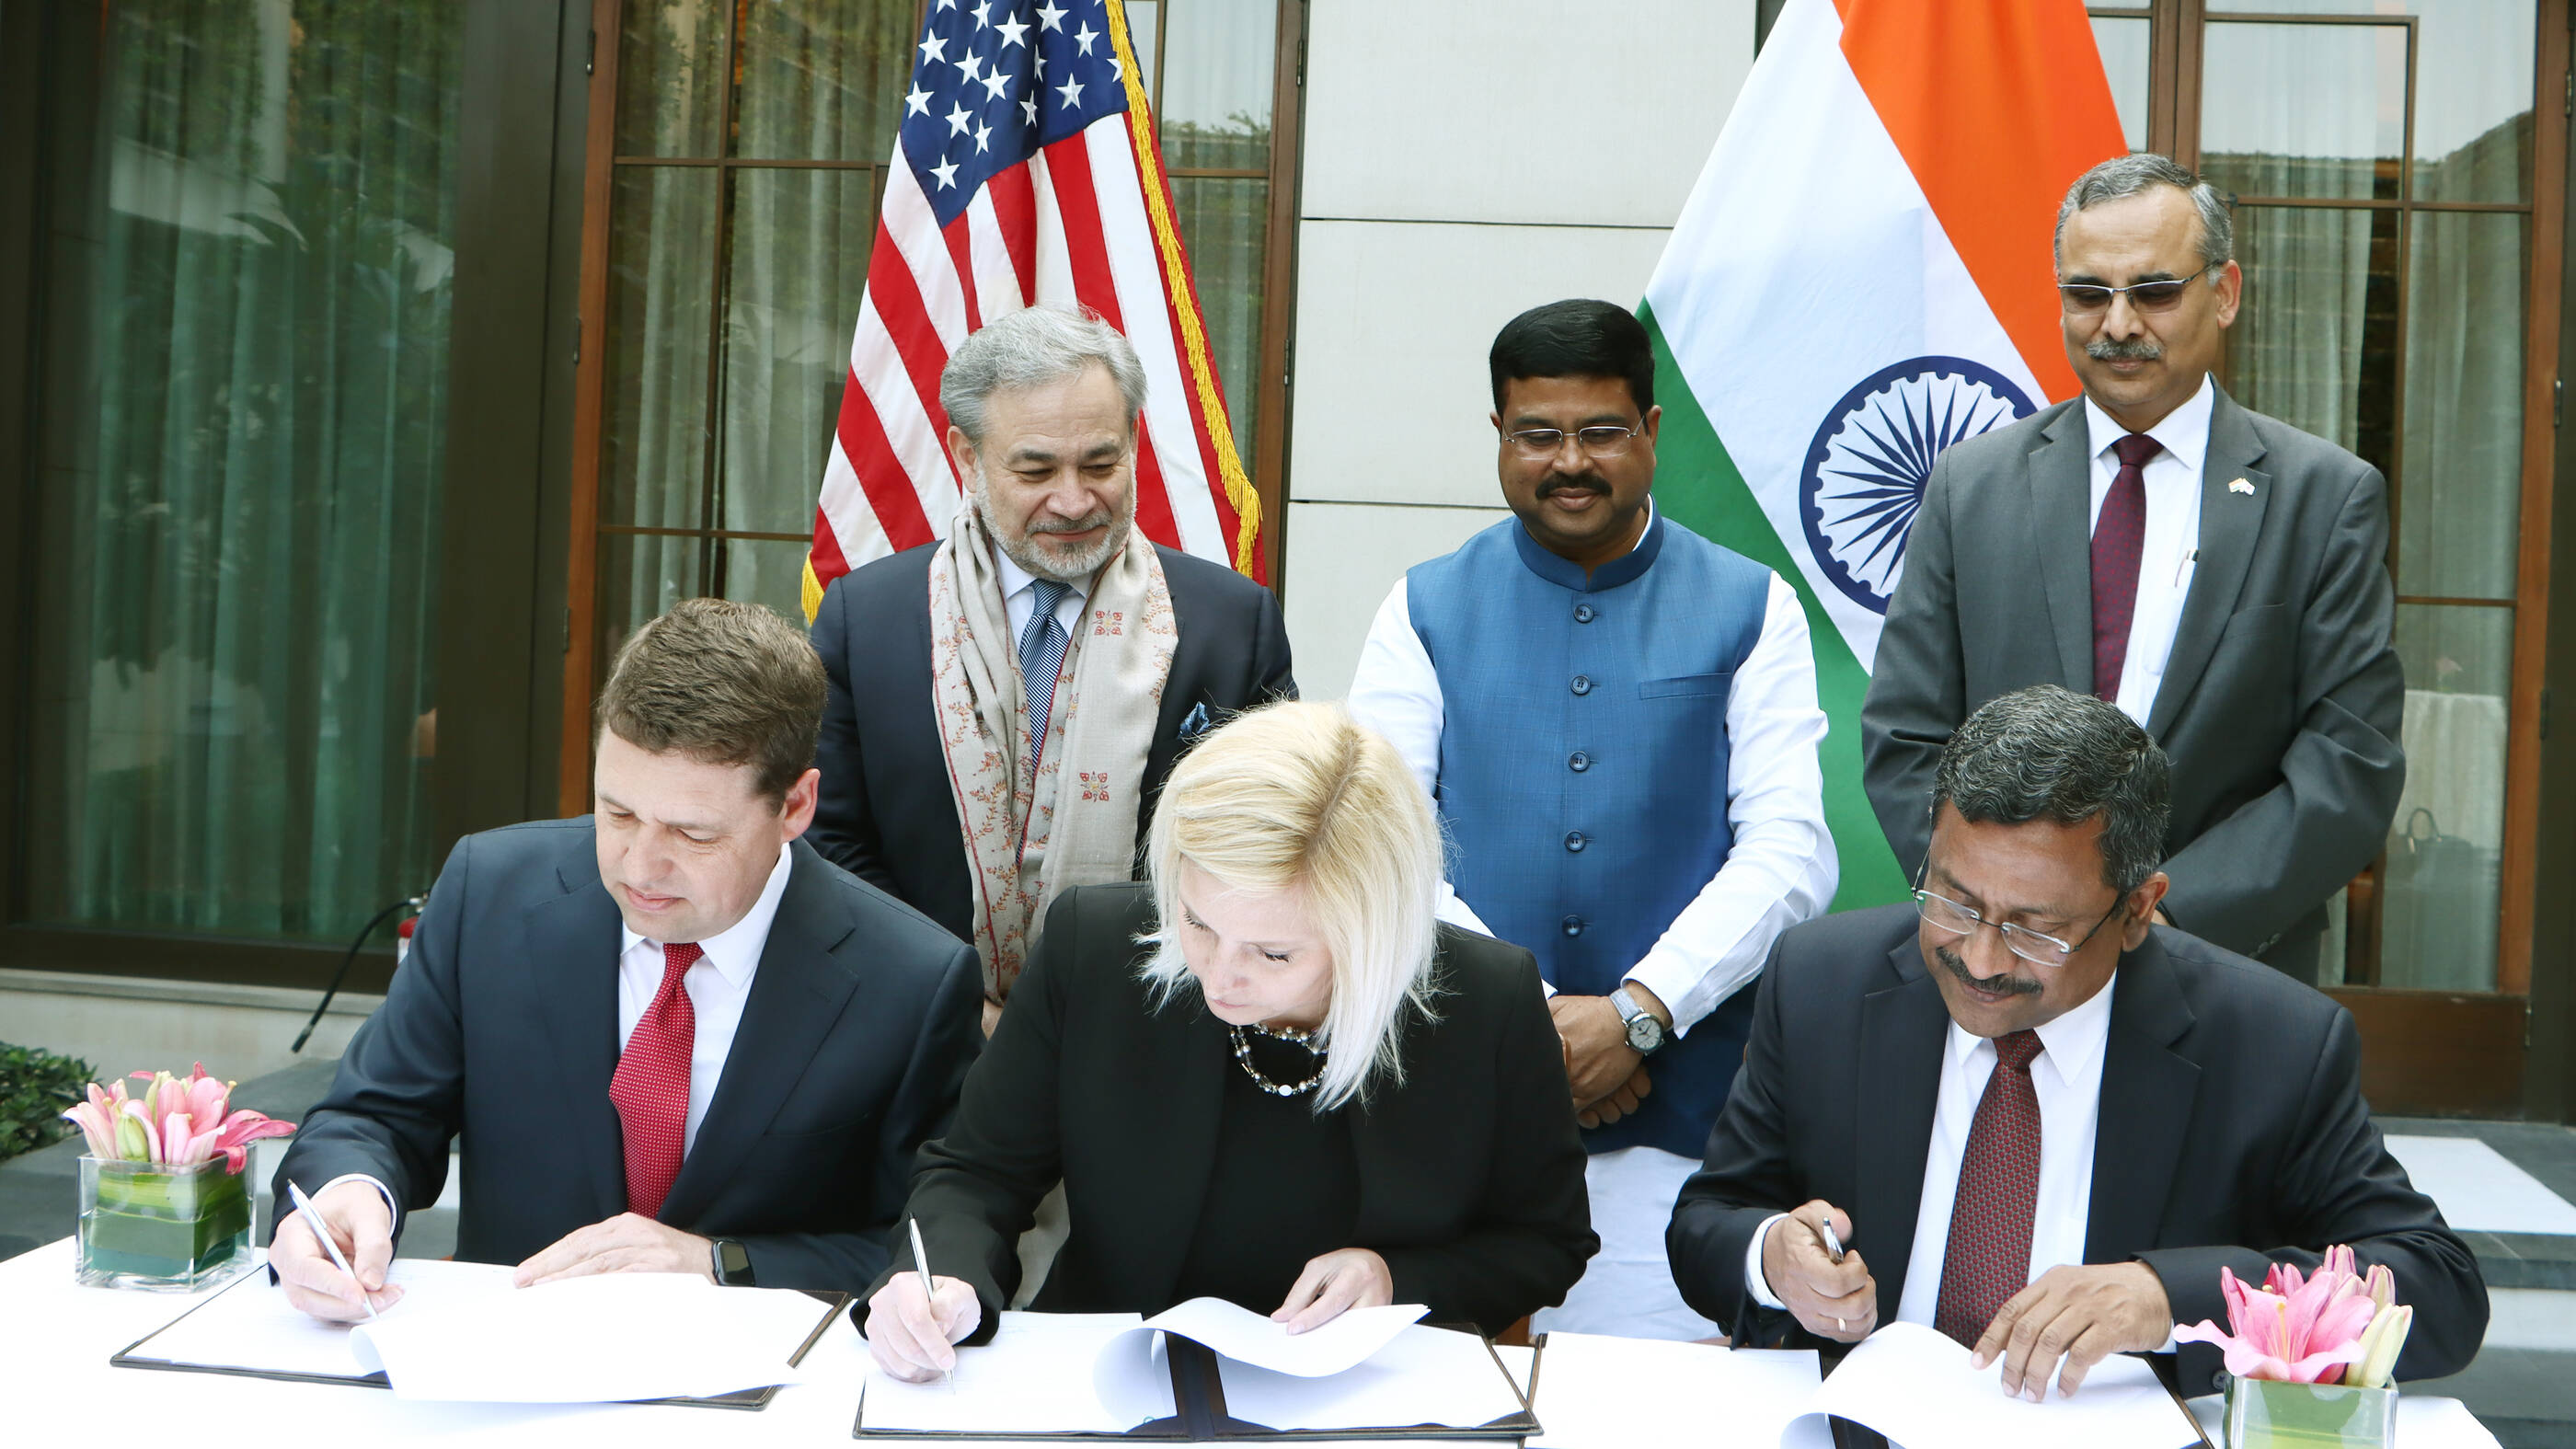 Seated (left to right): Alex Volkov, Chairman, ExxonMobil LNG Market Development Inc; Jillian Evanko, CEO, Chart Industries, Inc; GK Satish, Director (PBD), IndianOil
Standing (left to right): US Energy Secretary Dan Brouillette, Indias Minister of Petroleum and Gas Dharmendra Pradhan and IndianOil Chairman Sanjiv Singh